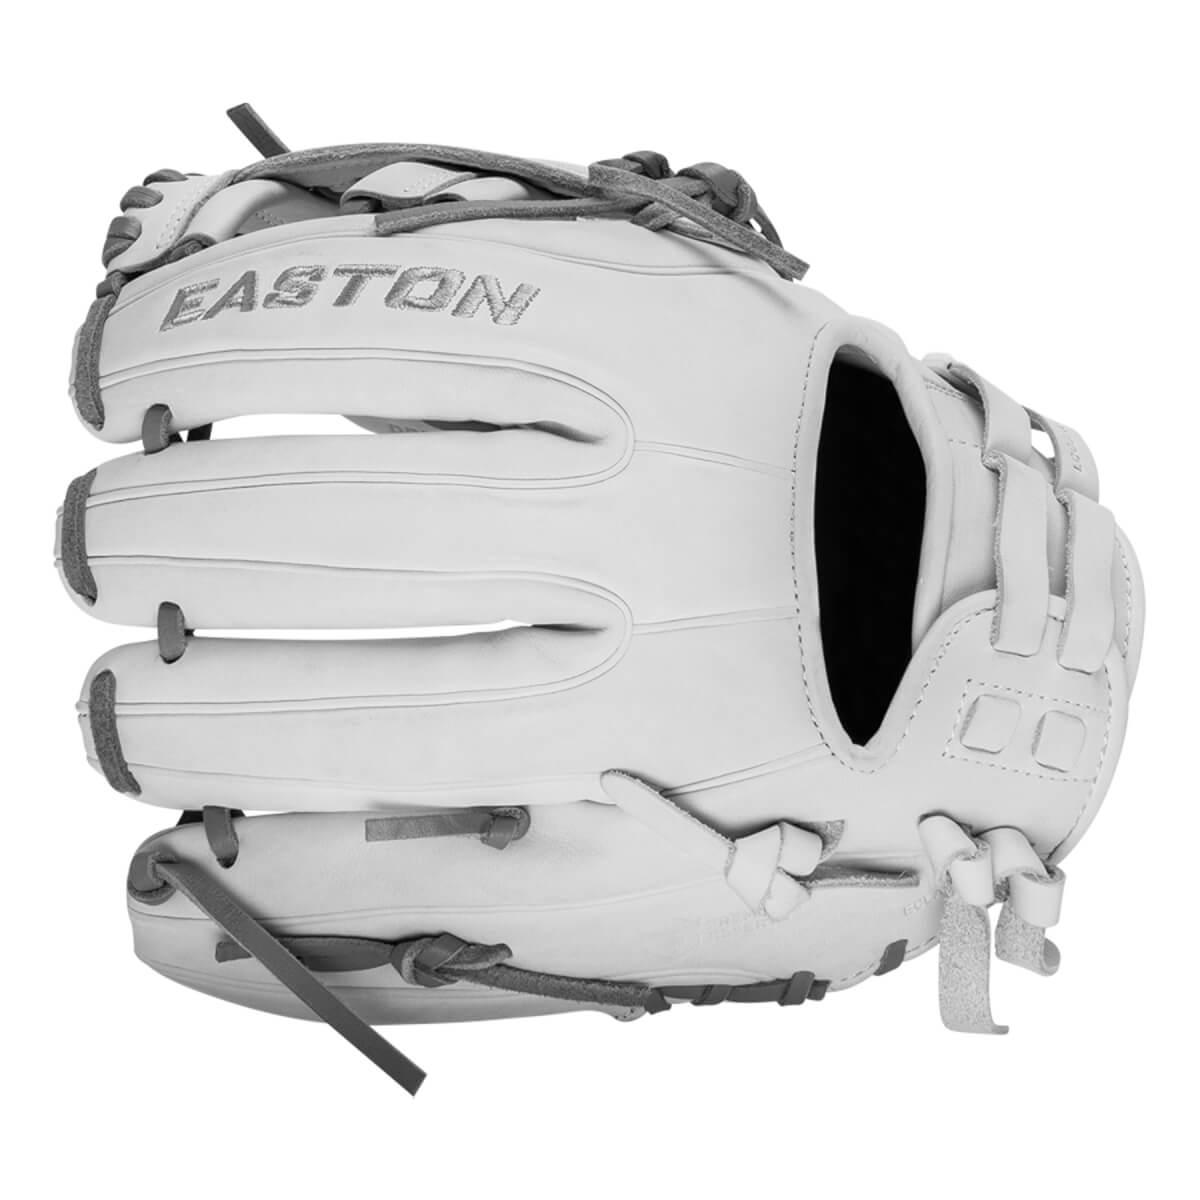 Easton Pro Collection 11.75